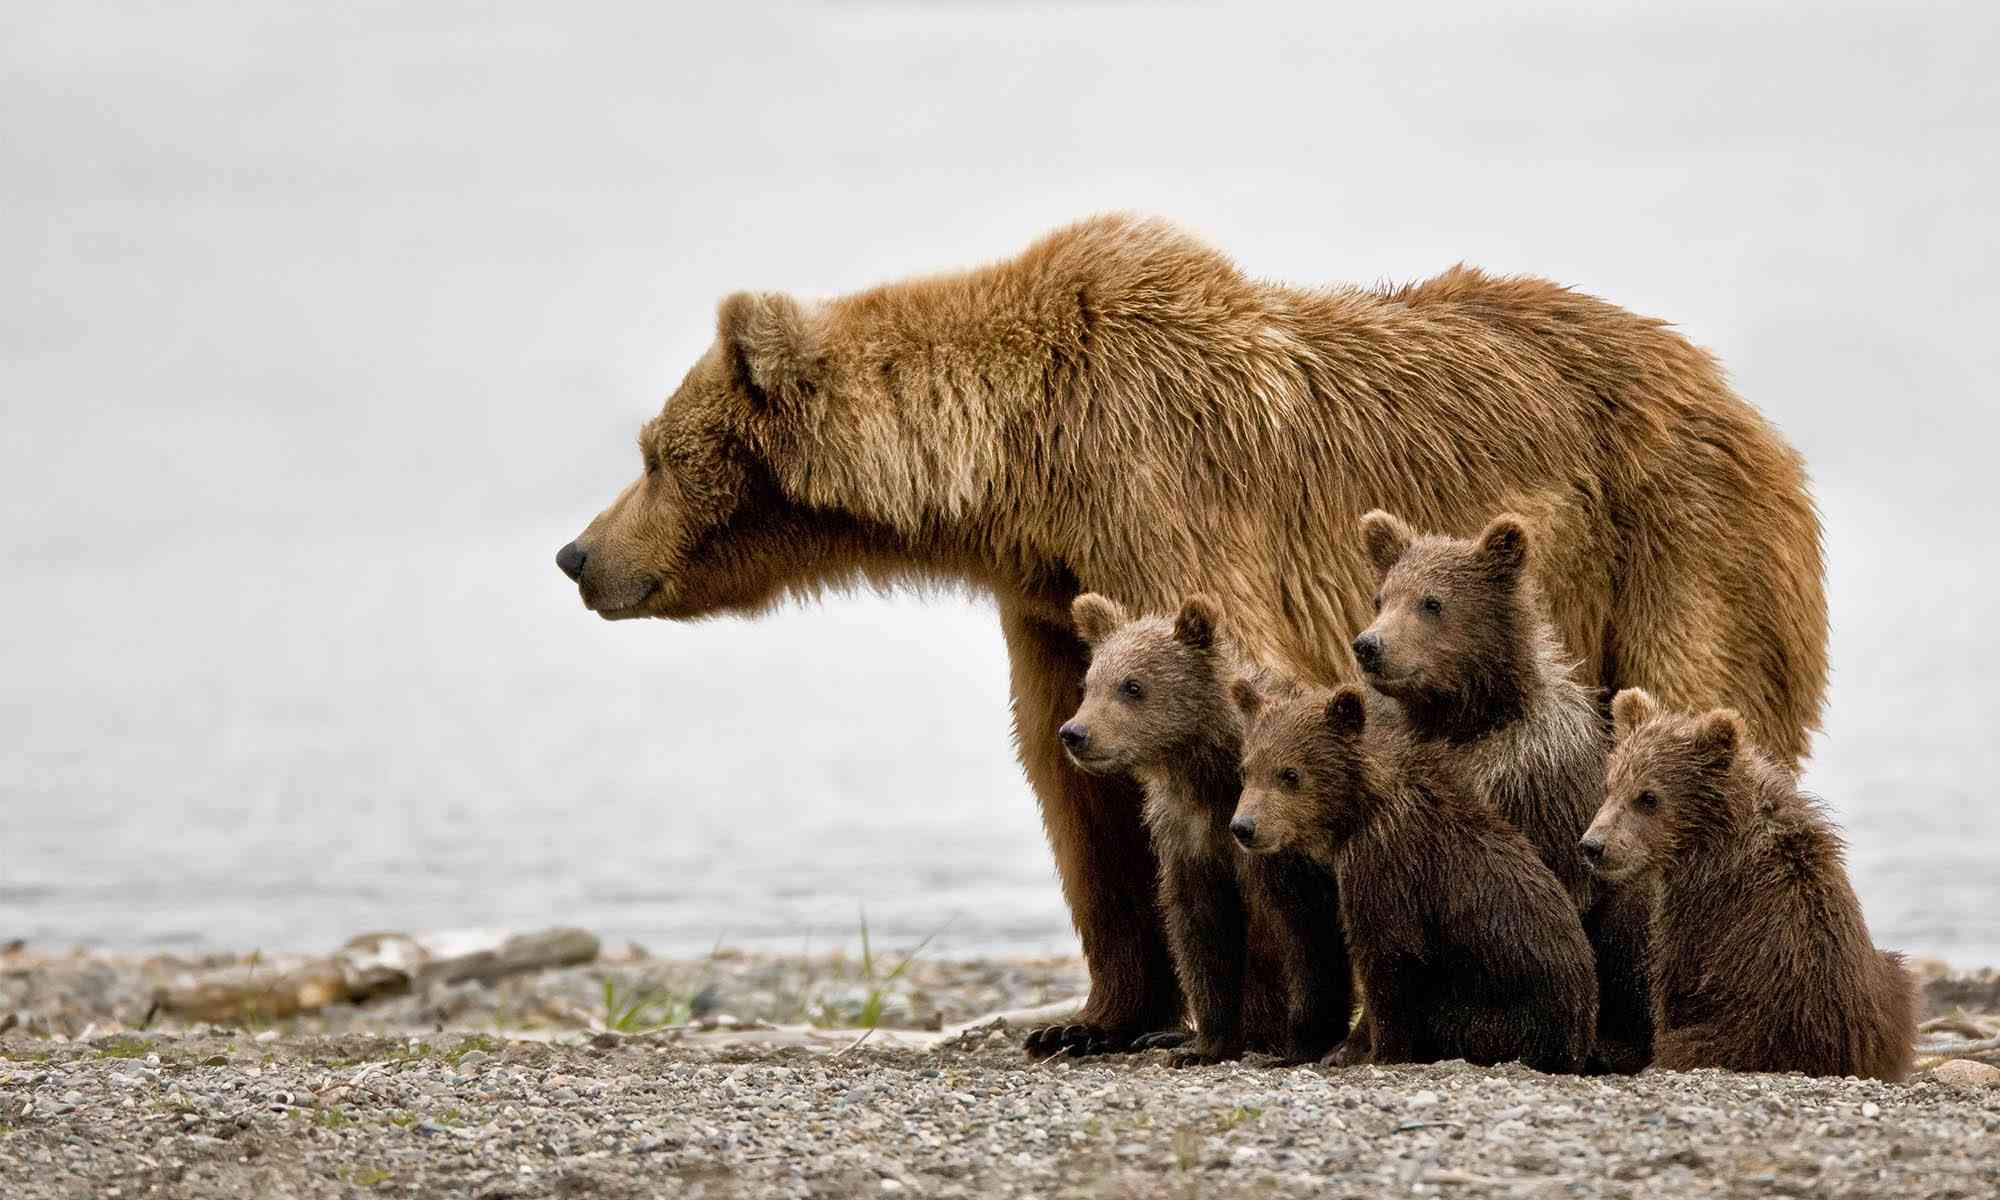 Brown Bears Of The World: Grizzly Present, Ominous Future? - Wildlife SOS